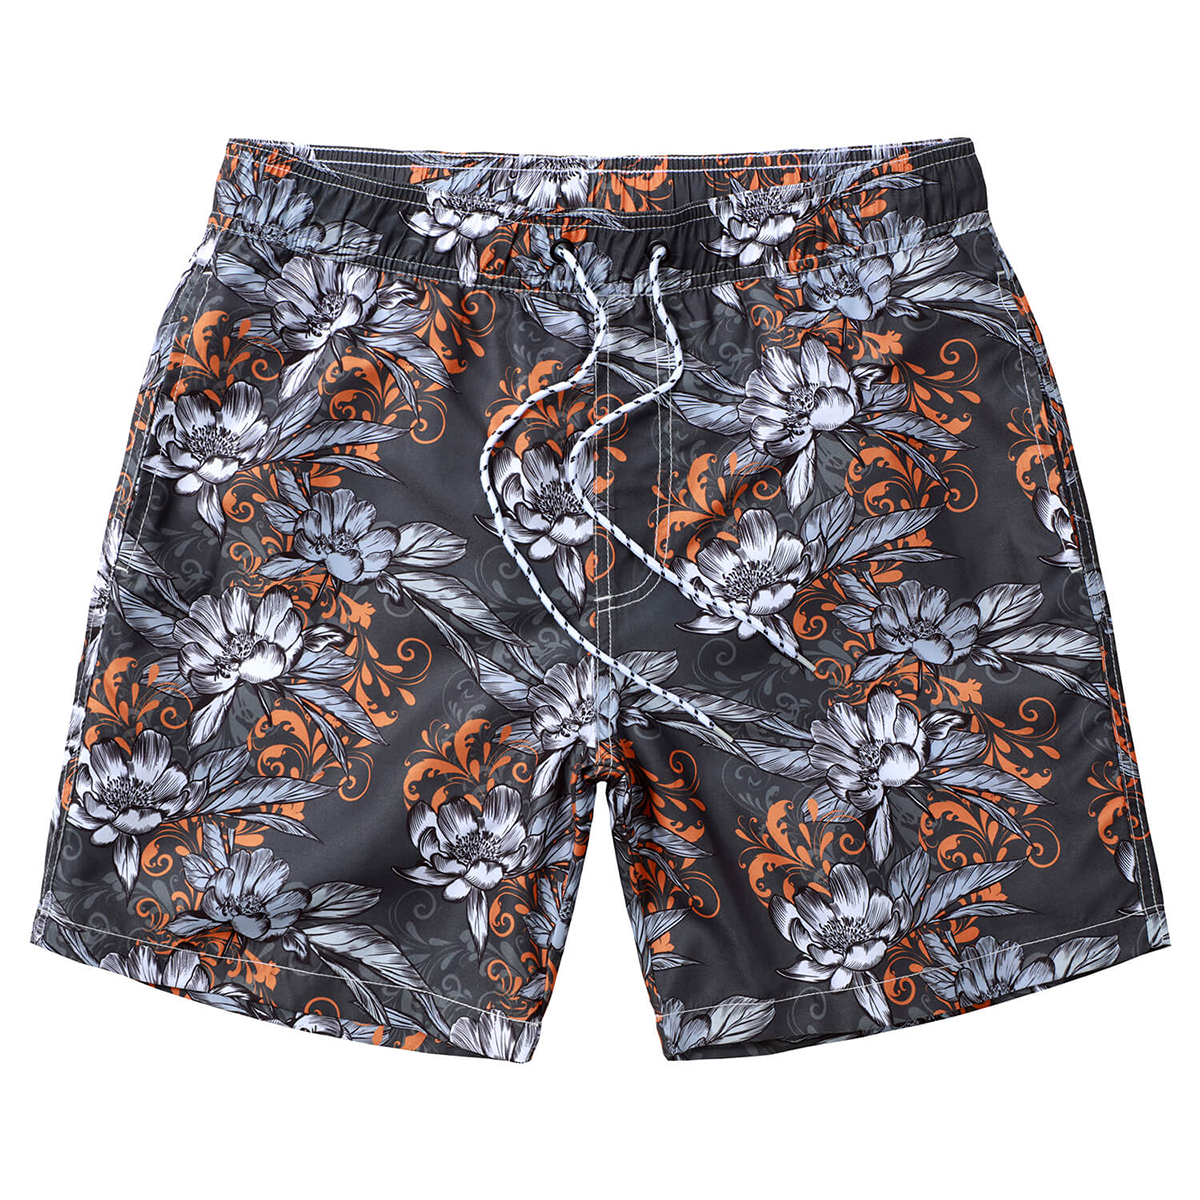 Men's Casual Funny Print Quick Dry Beach Swimming Trunks